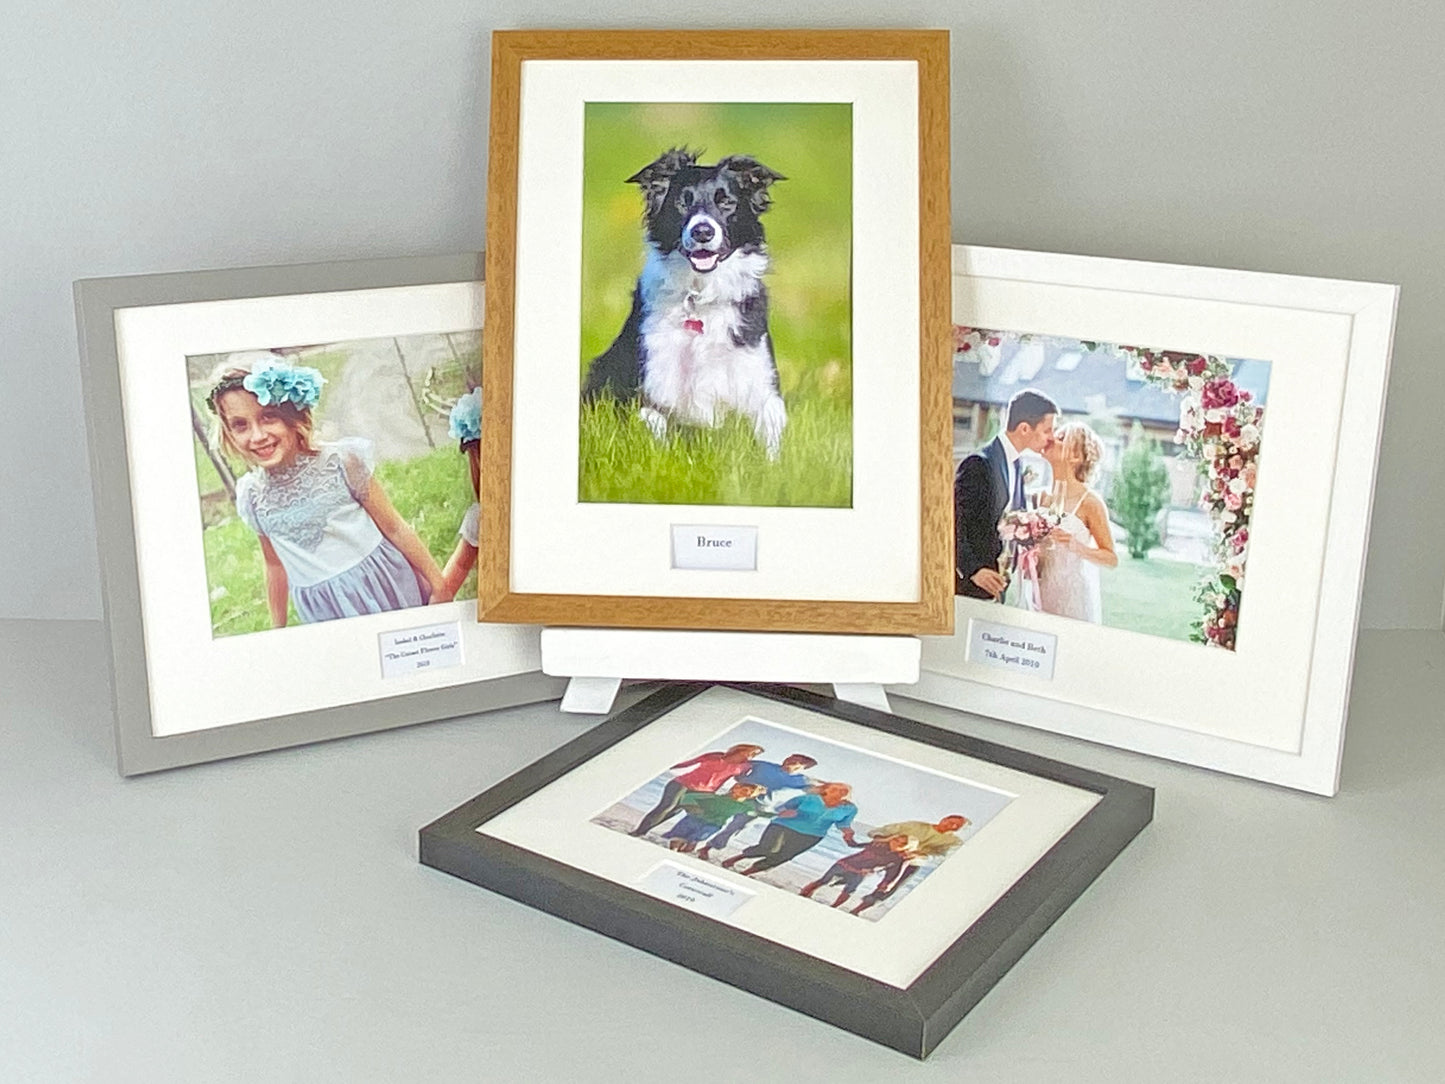 Personalised Caption Frames. 30x40cm Frame with 10x8 inch Photo. Your Text and Photo to treasure a special Anniversary. A Perfect Gift.